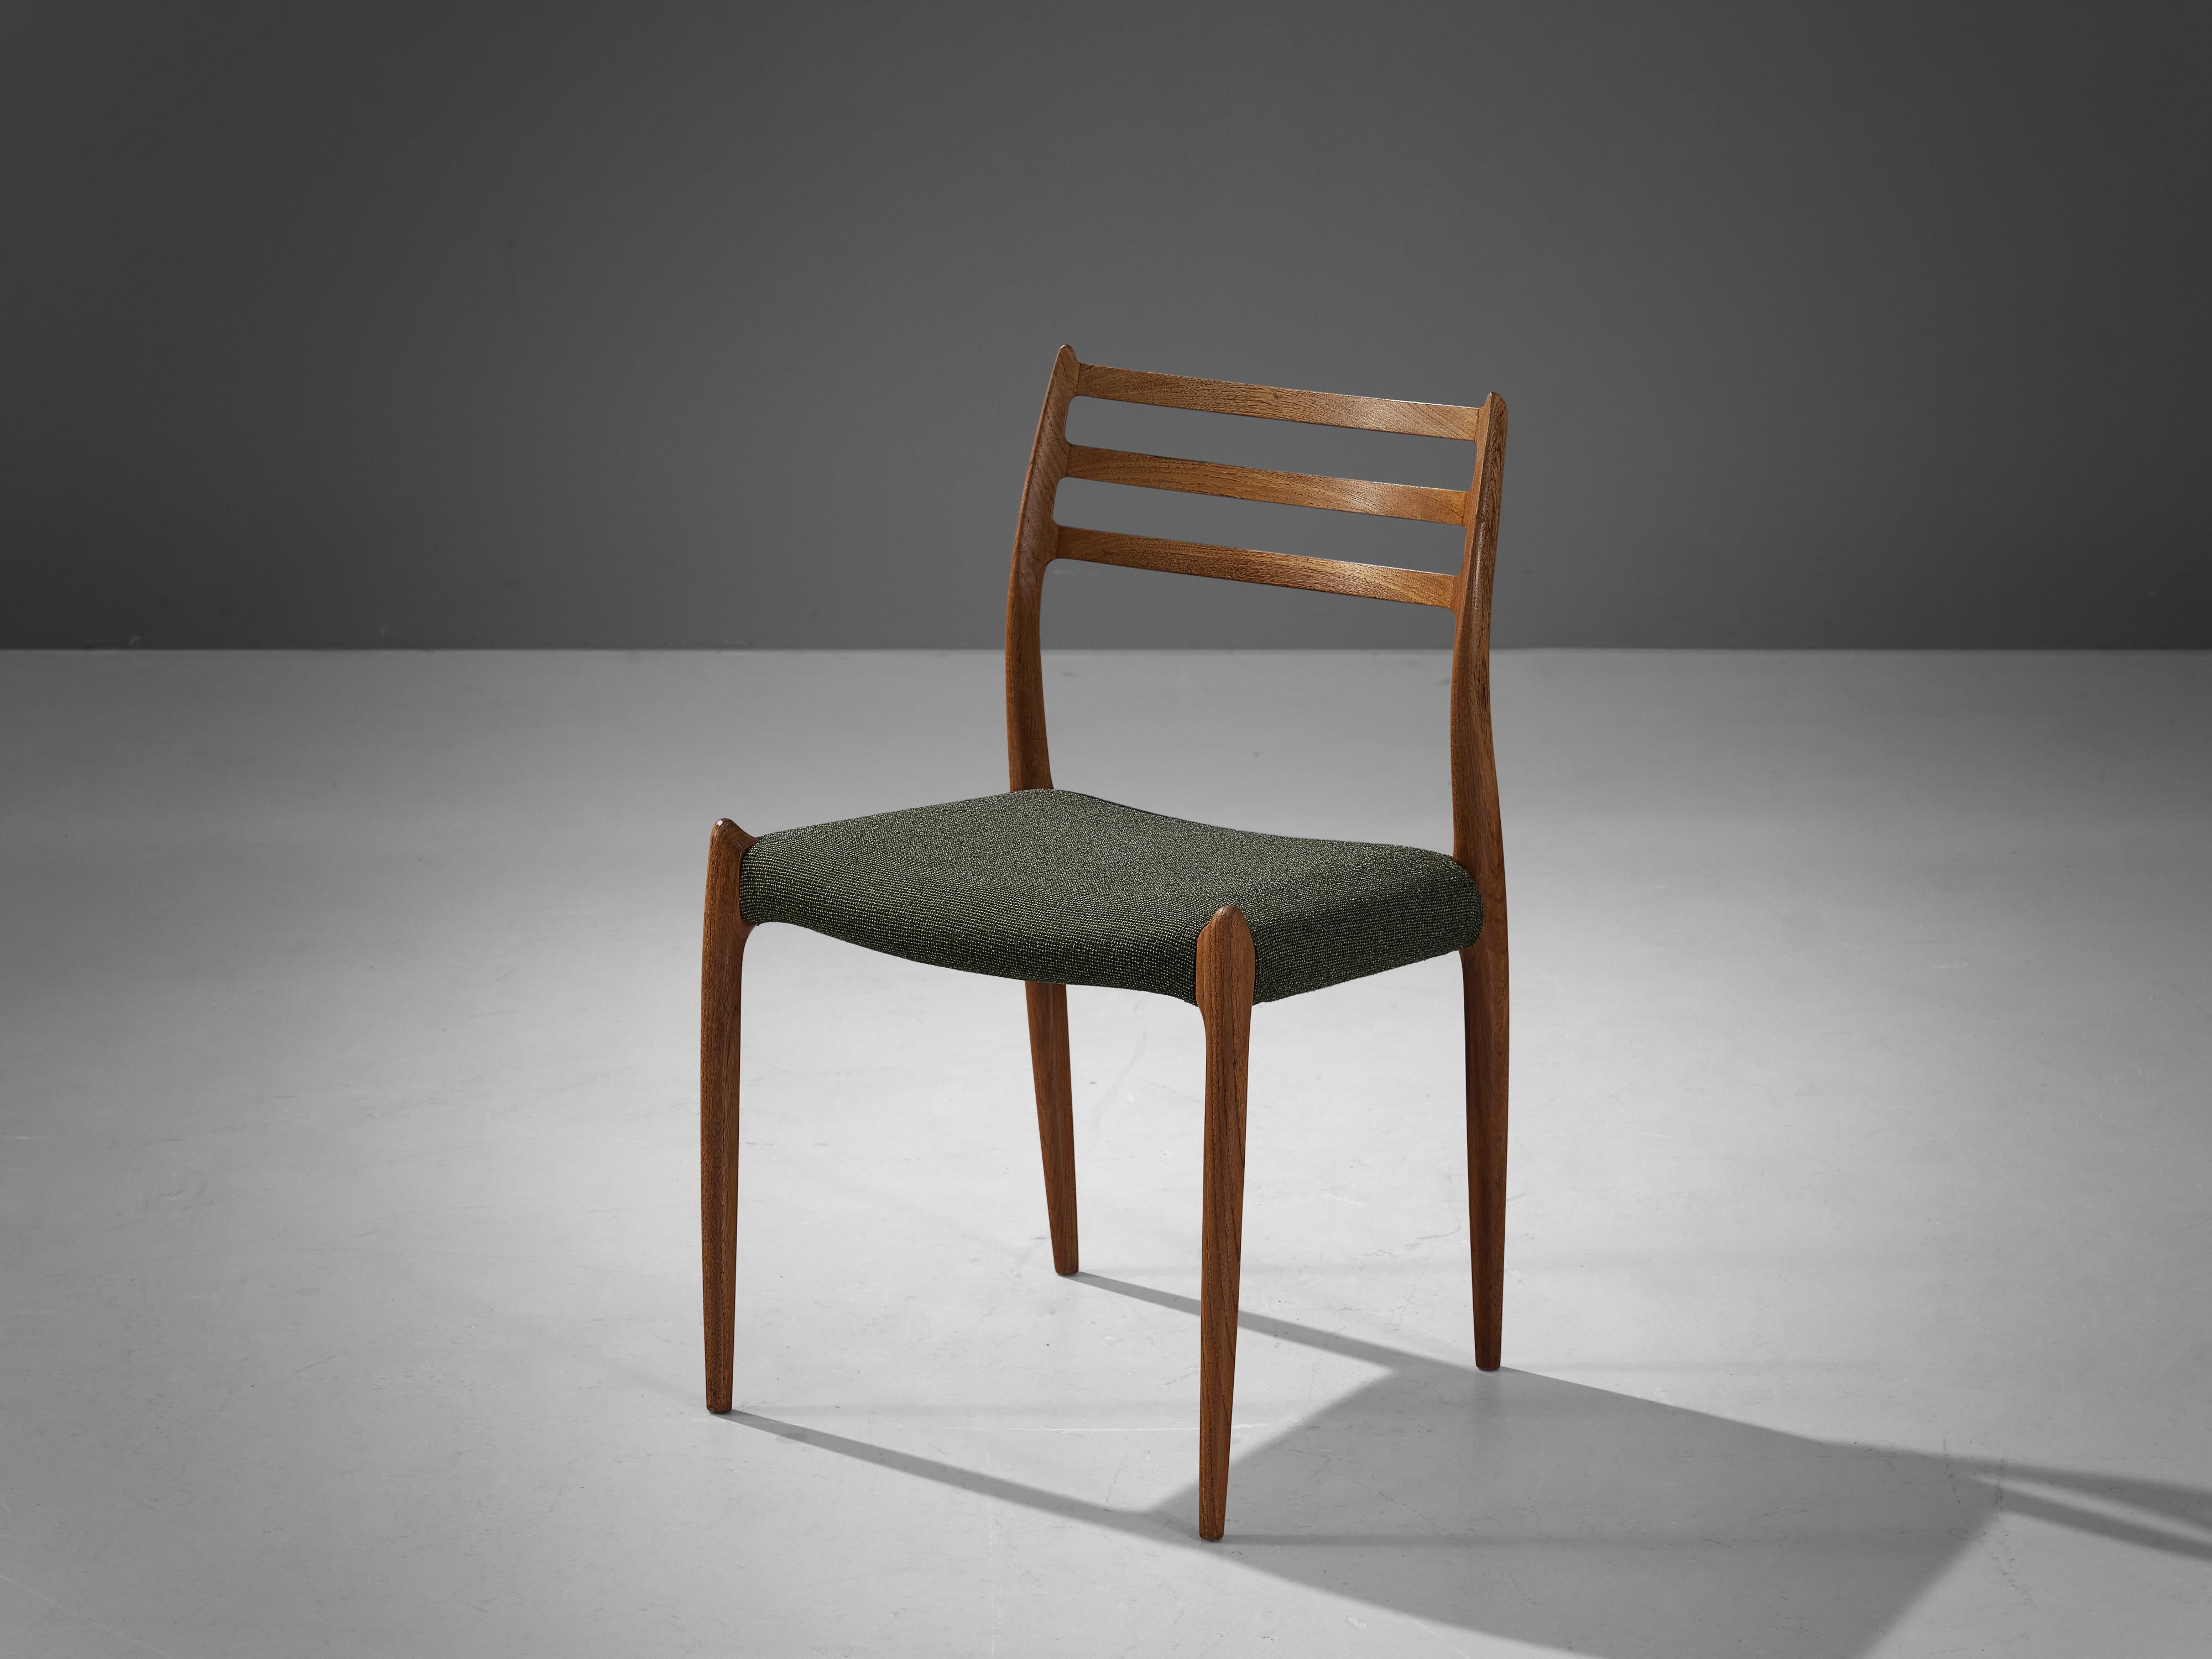 Niels Otto Moller, for J.L. Møllers Møbelfabrik, dining chair 'model nr. 78', in teak and fabric, Denmark, 1960s.

Dining chair in green upholstery. This design, 'model nr. 78', is by far one of Moller's most refined designs, rewarded worldwide.